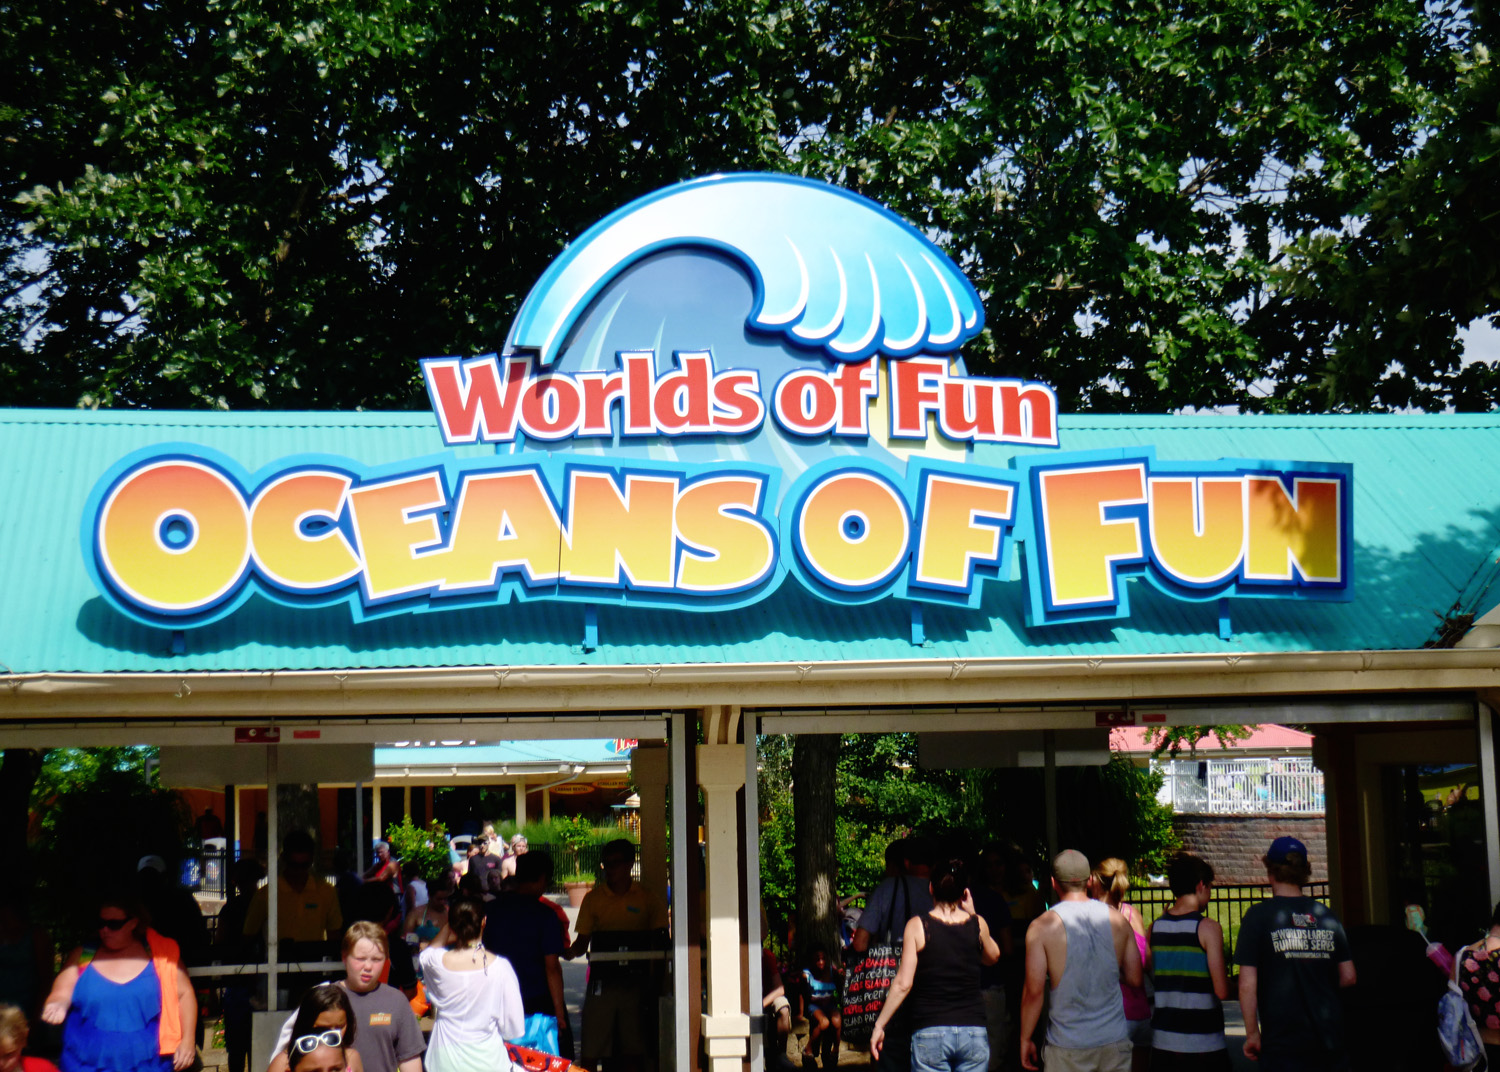 Oceans of Fun in Kansas City, Missouri has some of the best kiddie water areas in town! For celebration of a holiday, special occasion or just making fun memories with your family. This is a visit you don't want to miss.